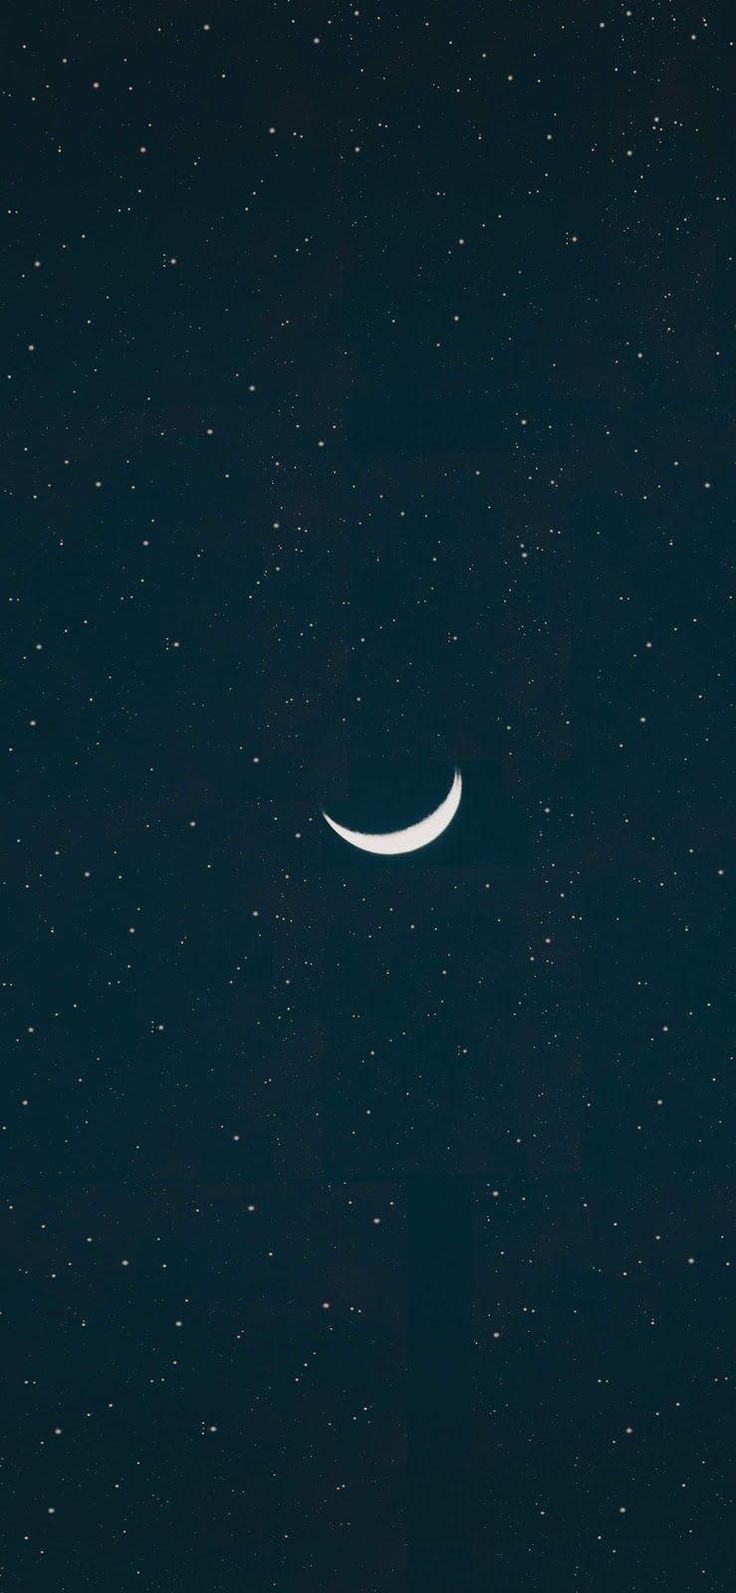 A crescent moon is in the sky - Moon